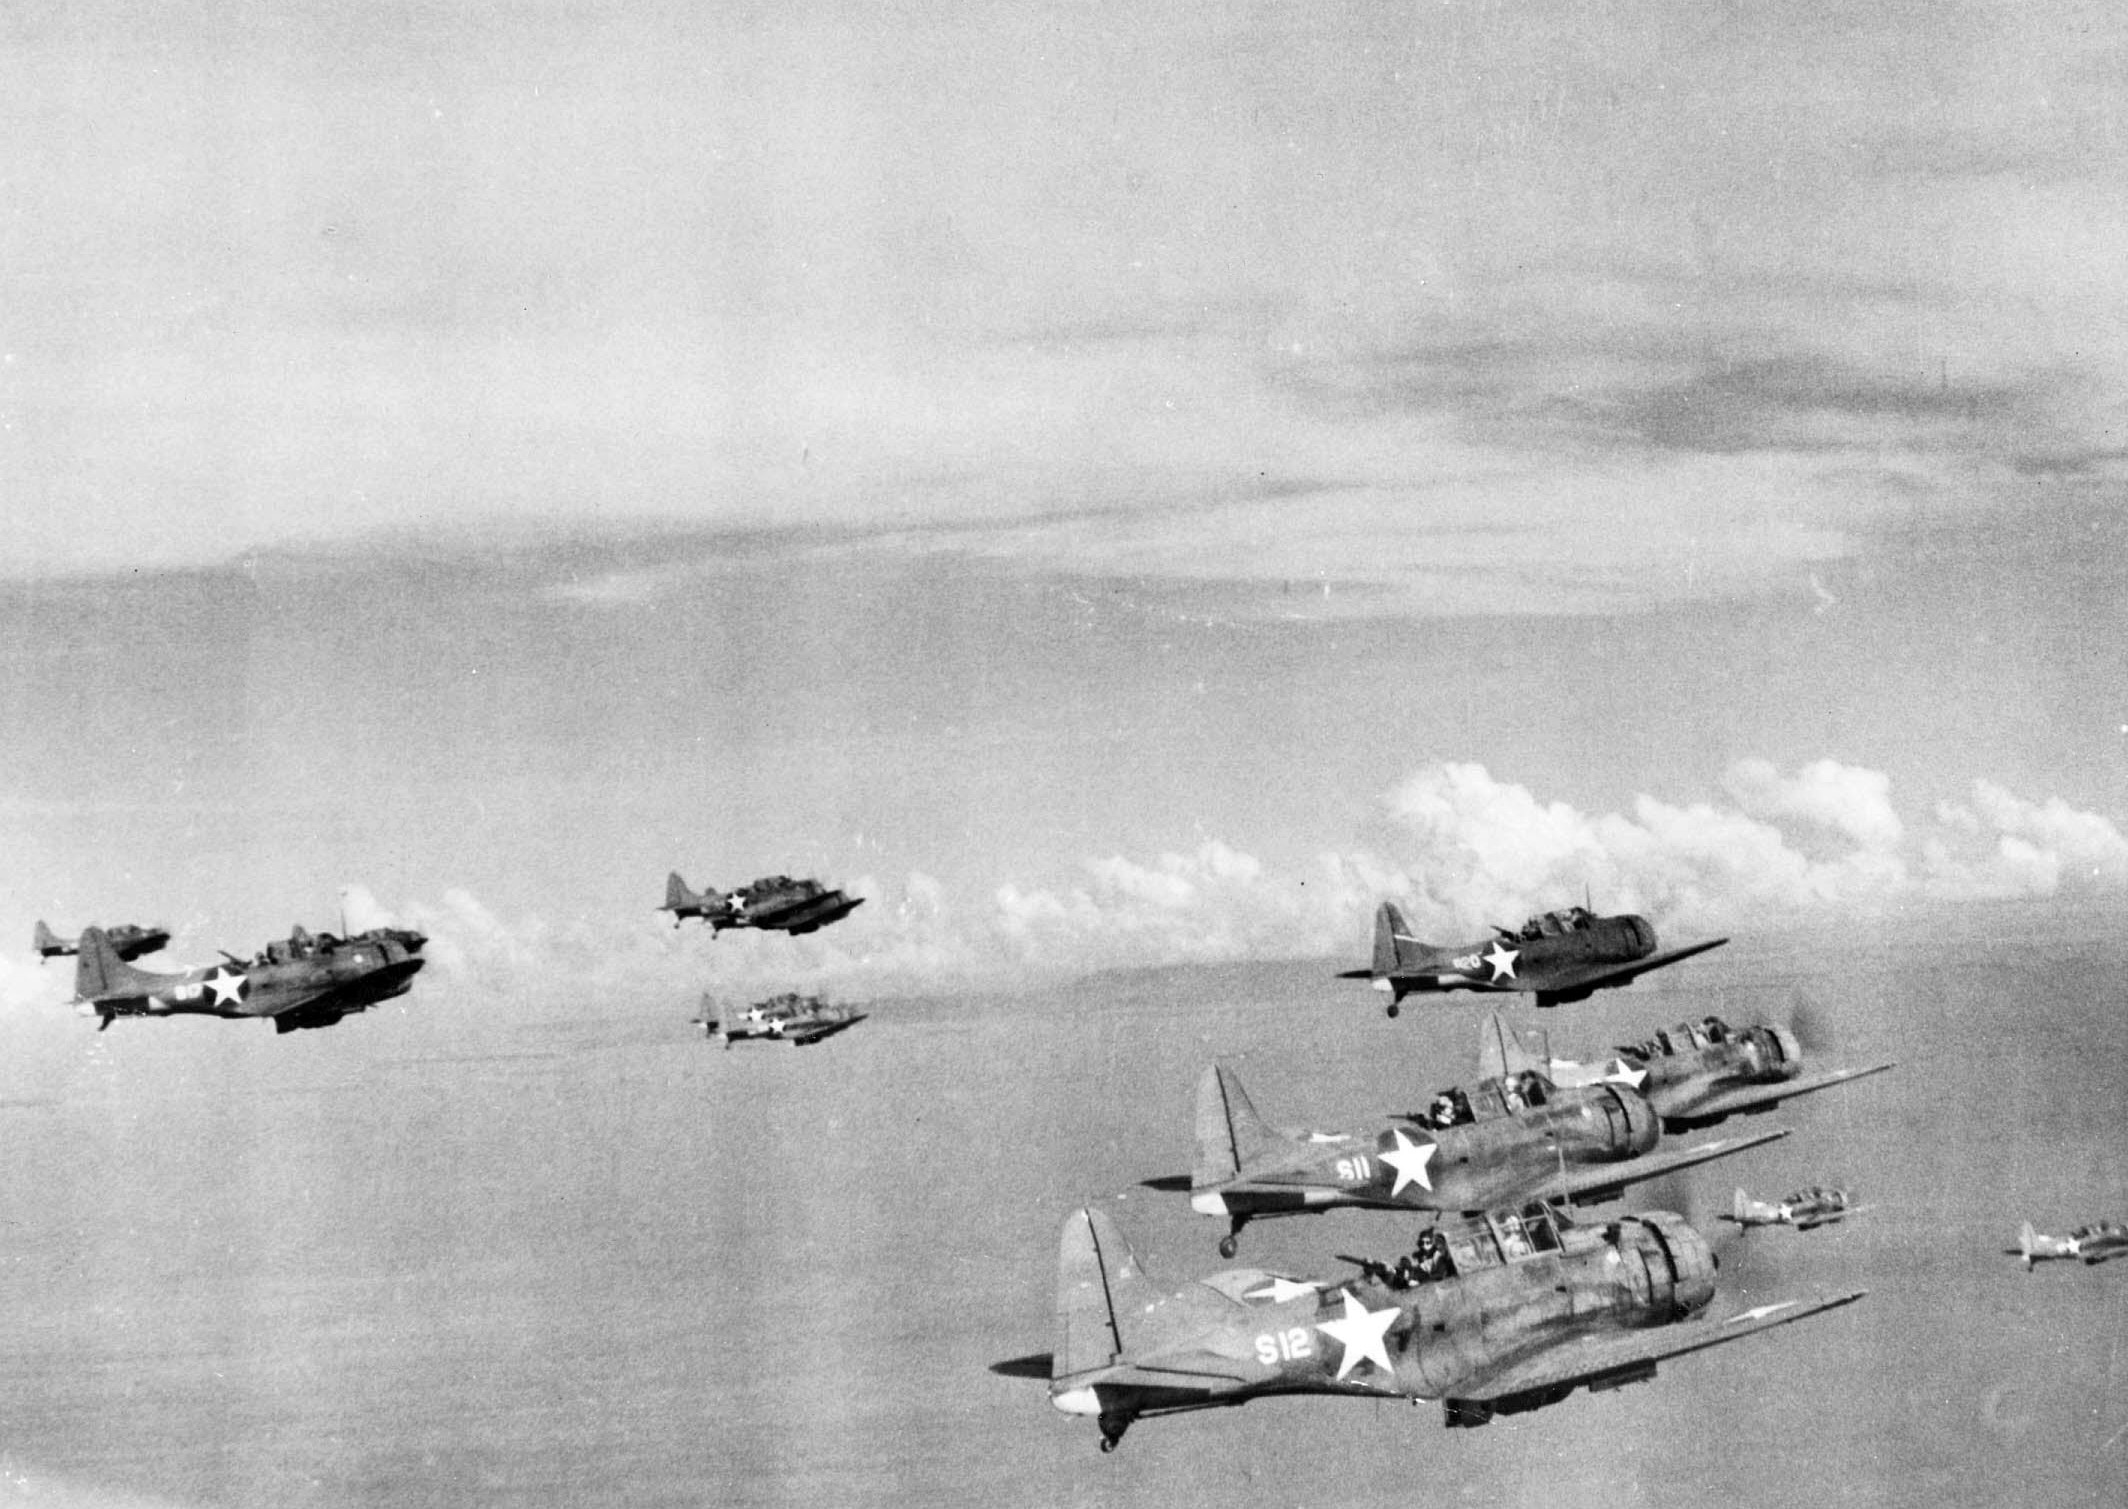 Guadalcanal August 1942 - February 1943: Alpha and Omega of Airpower